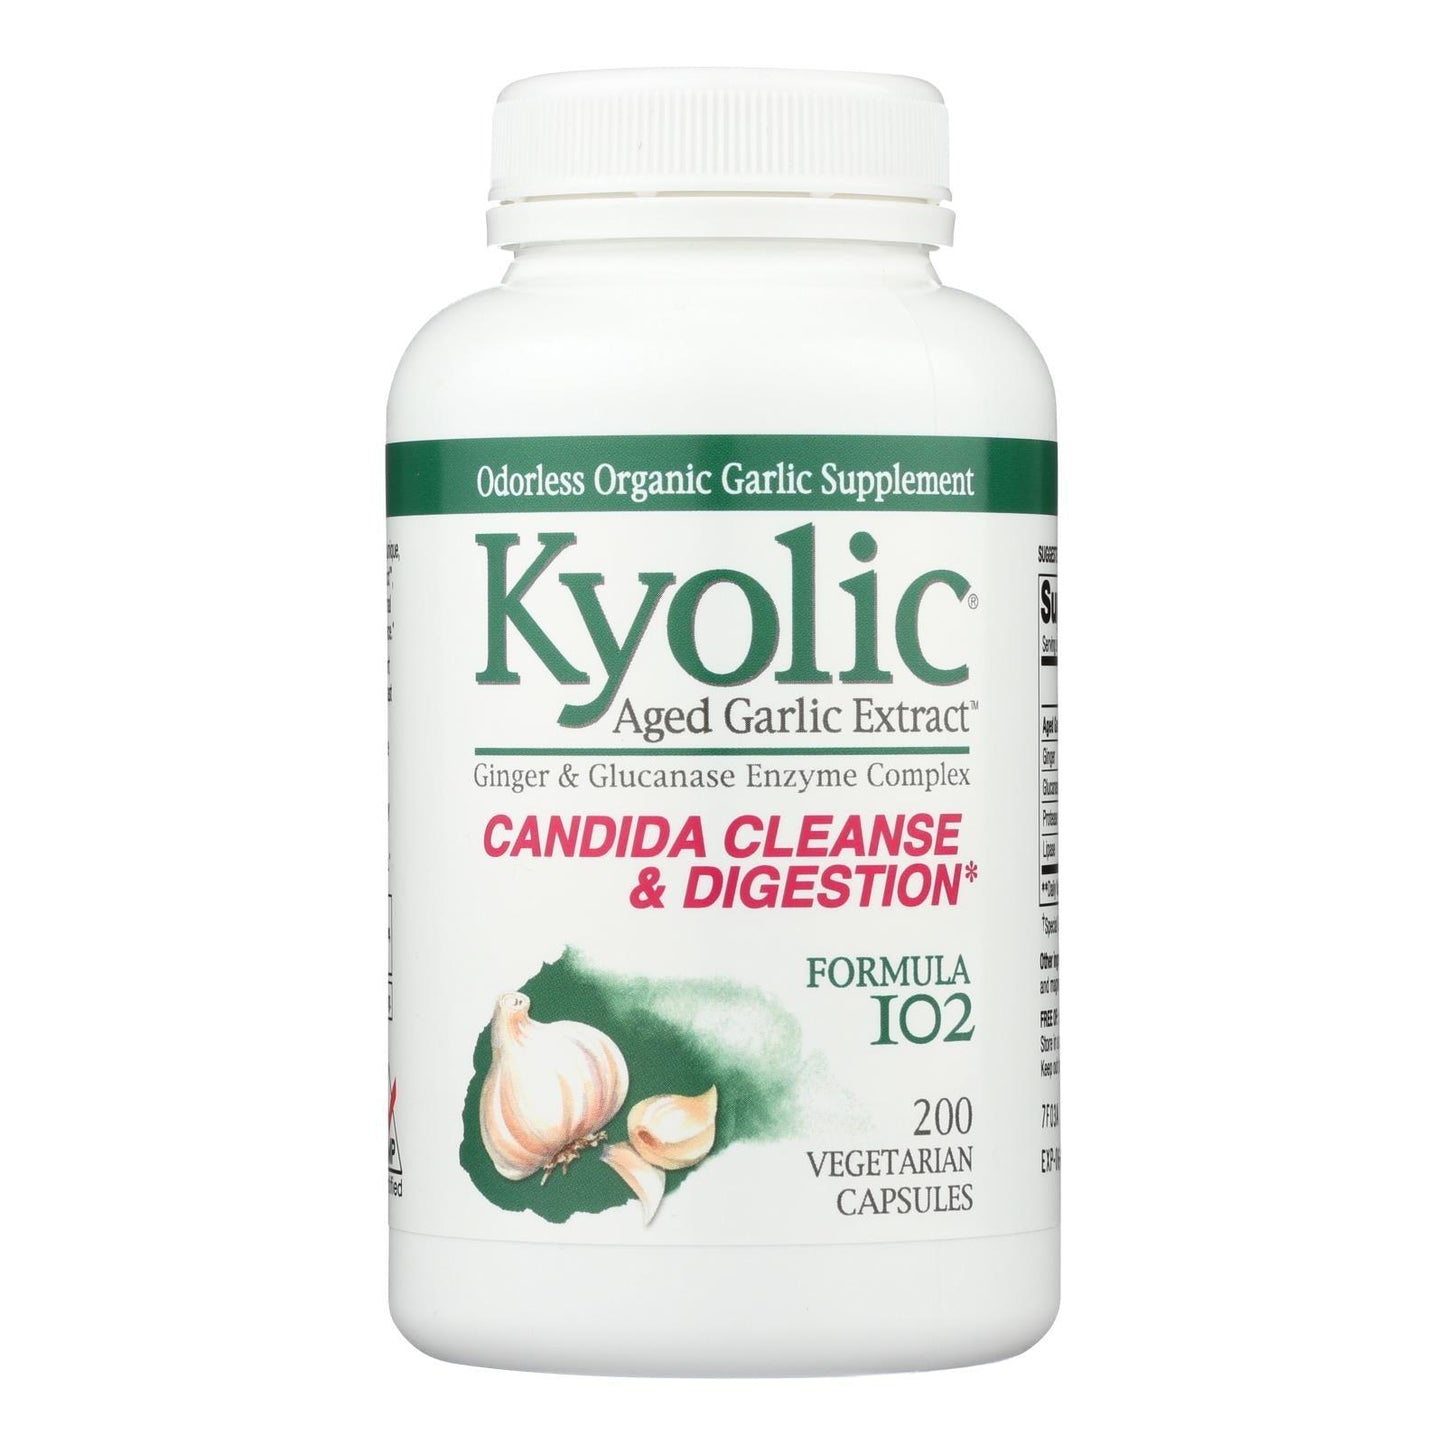 Kyolic - Aged Garlic Extract Candida Cleanse And Digestion Formula102 - 200 Vegetarian Capsules - Loomini